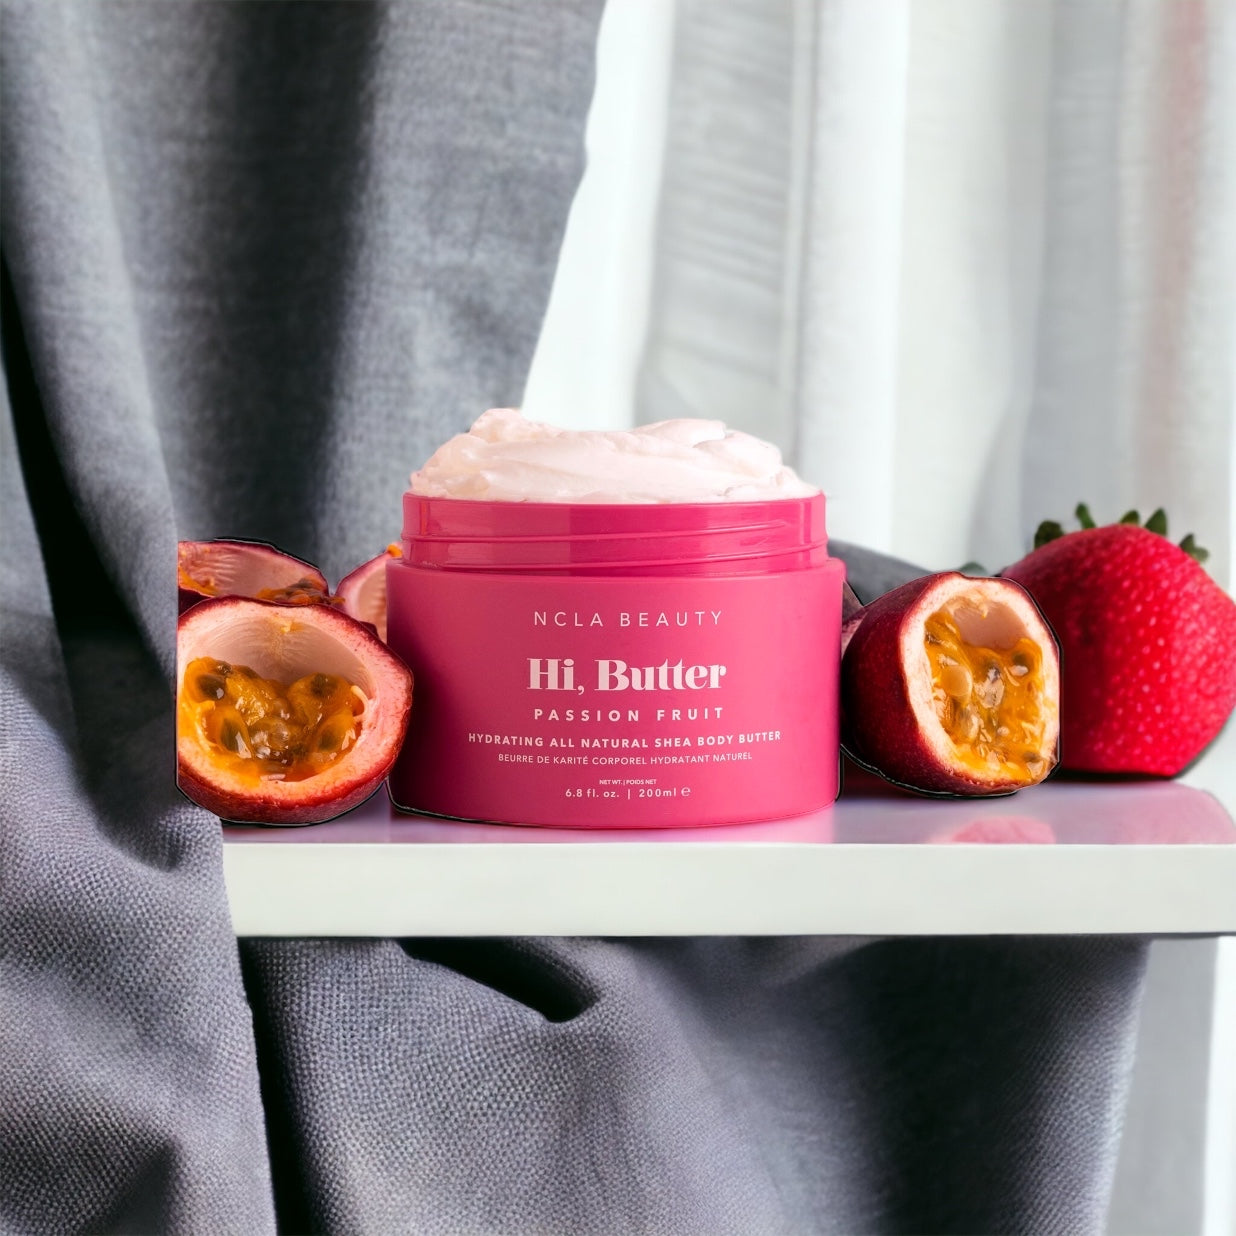 Hi, Butter Passion Fruit Body Butter